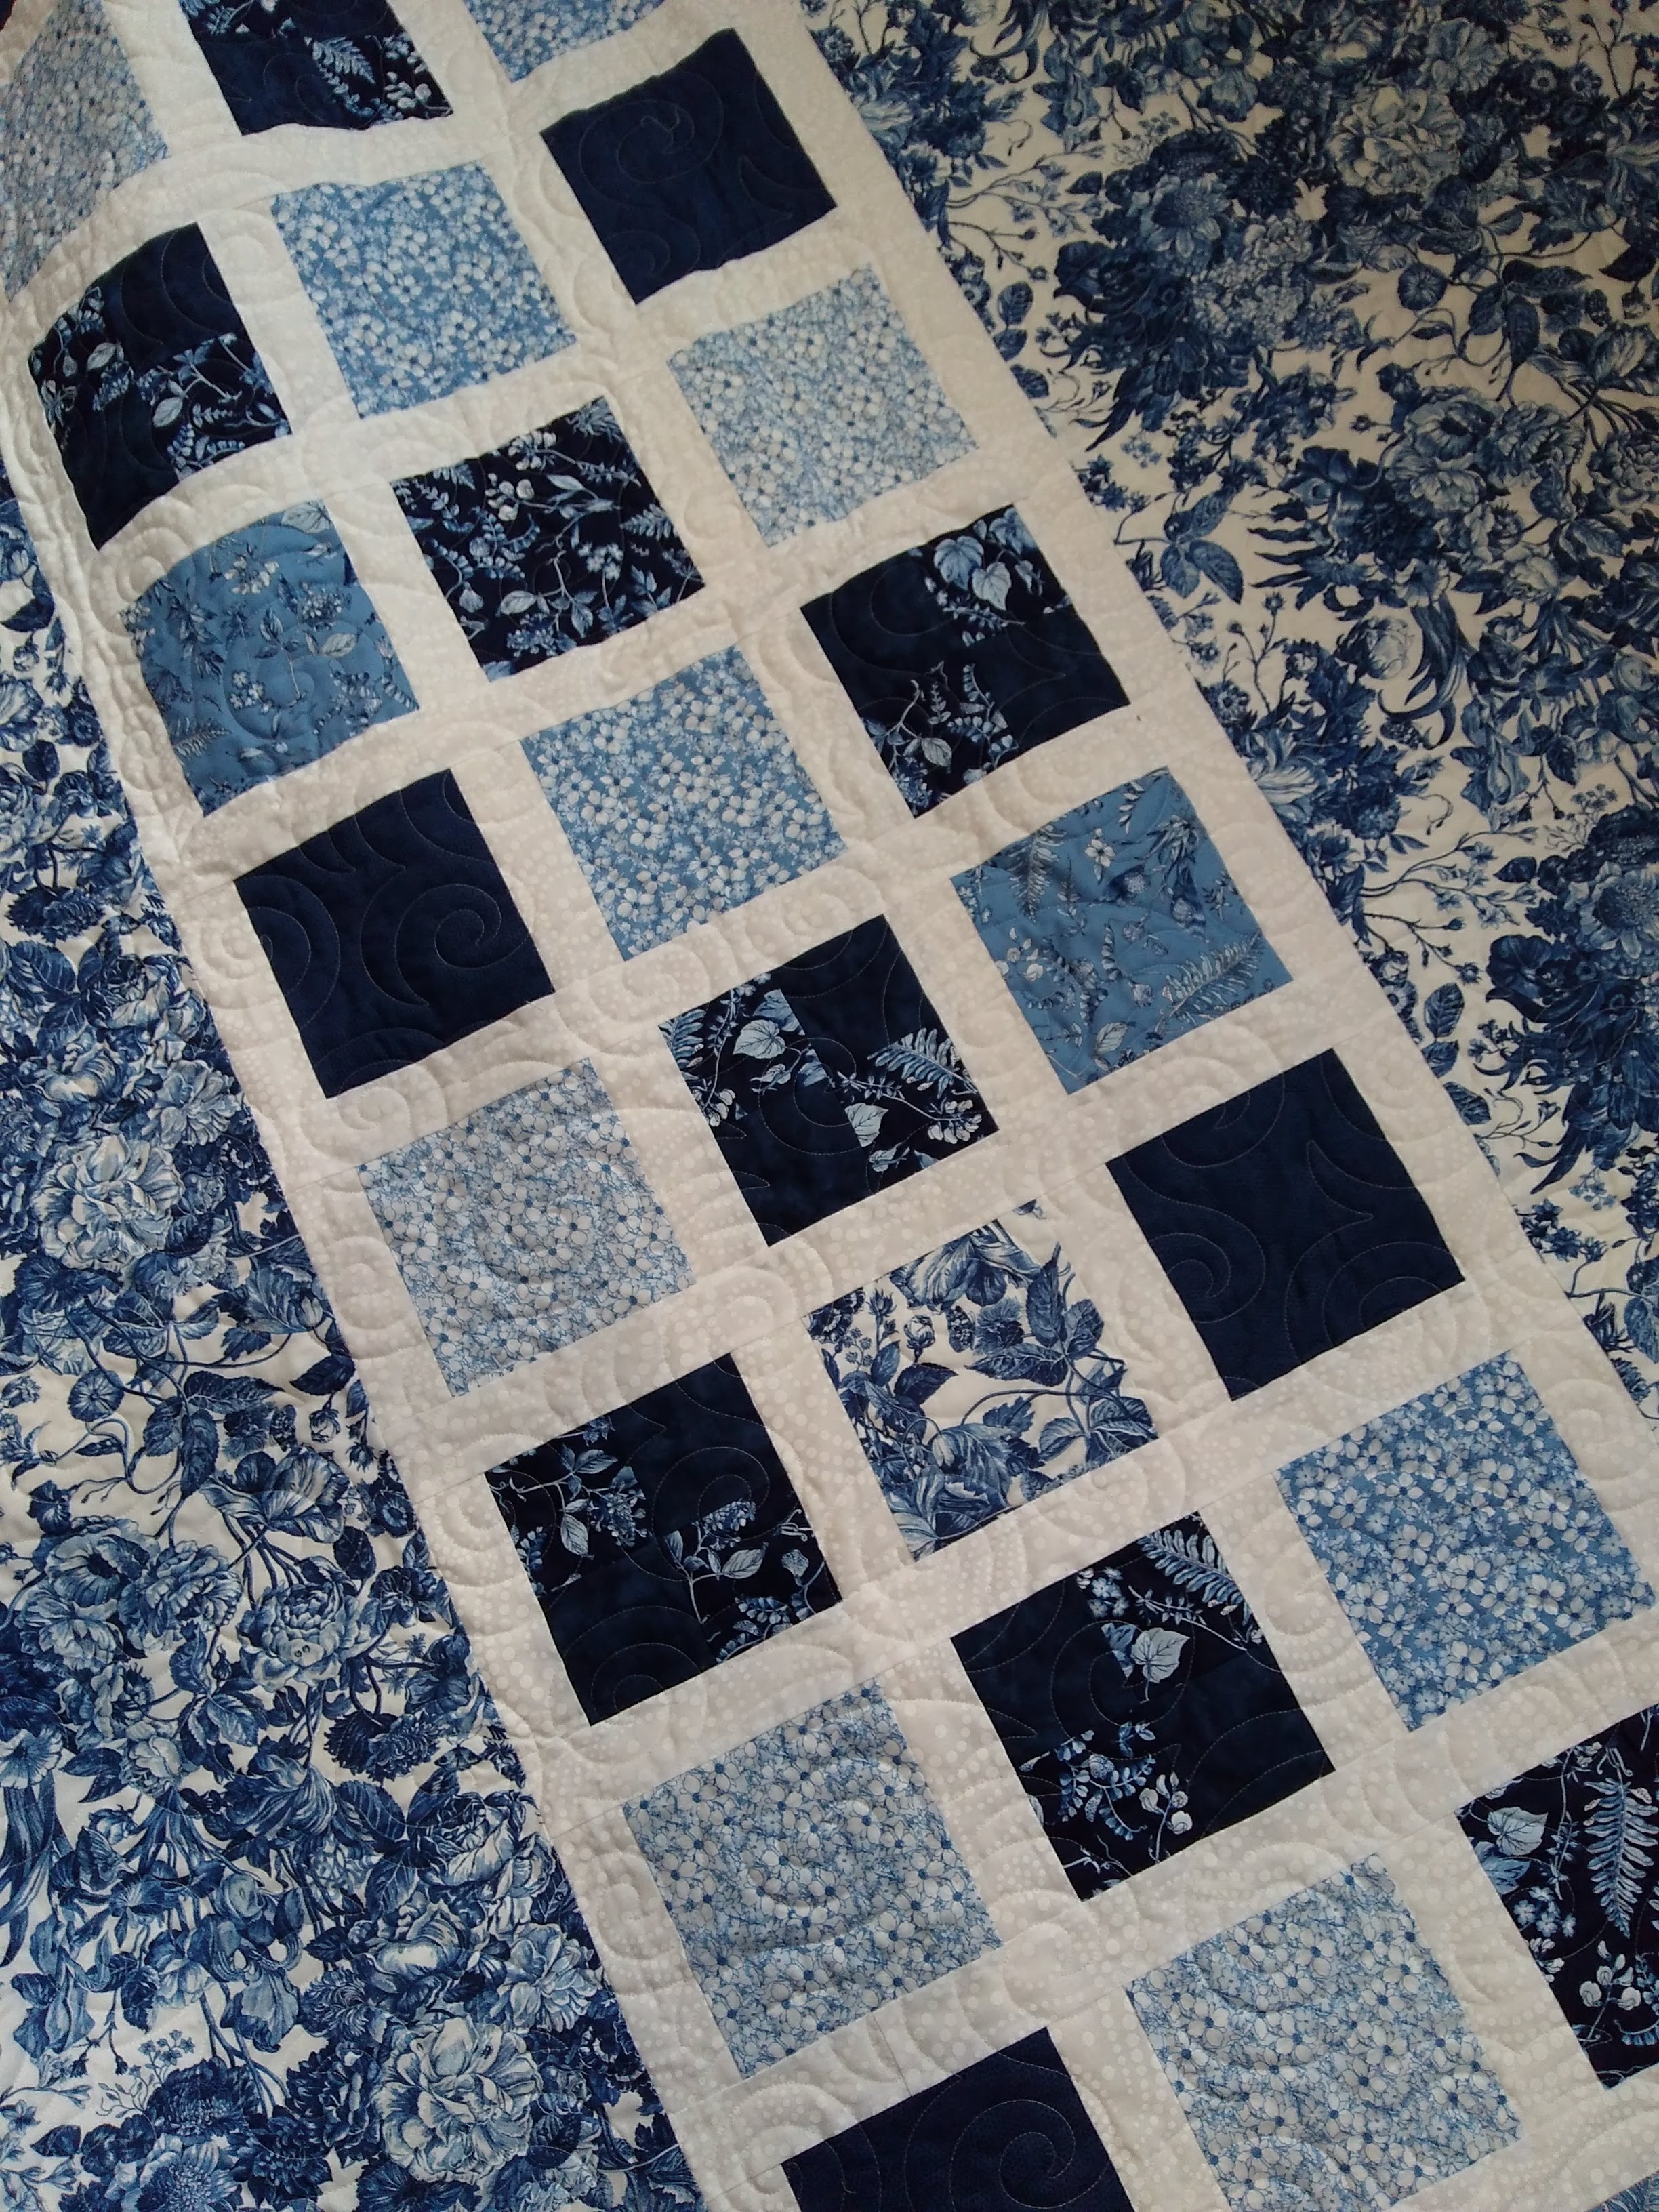 Canuck Quilter: So many projects, so little time!